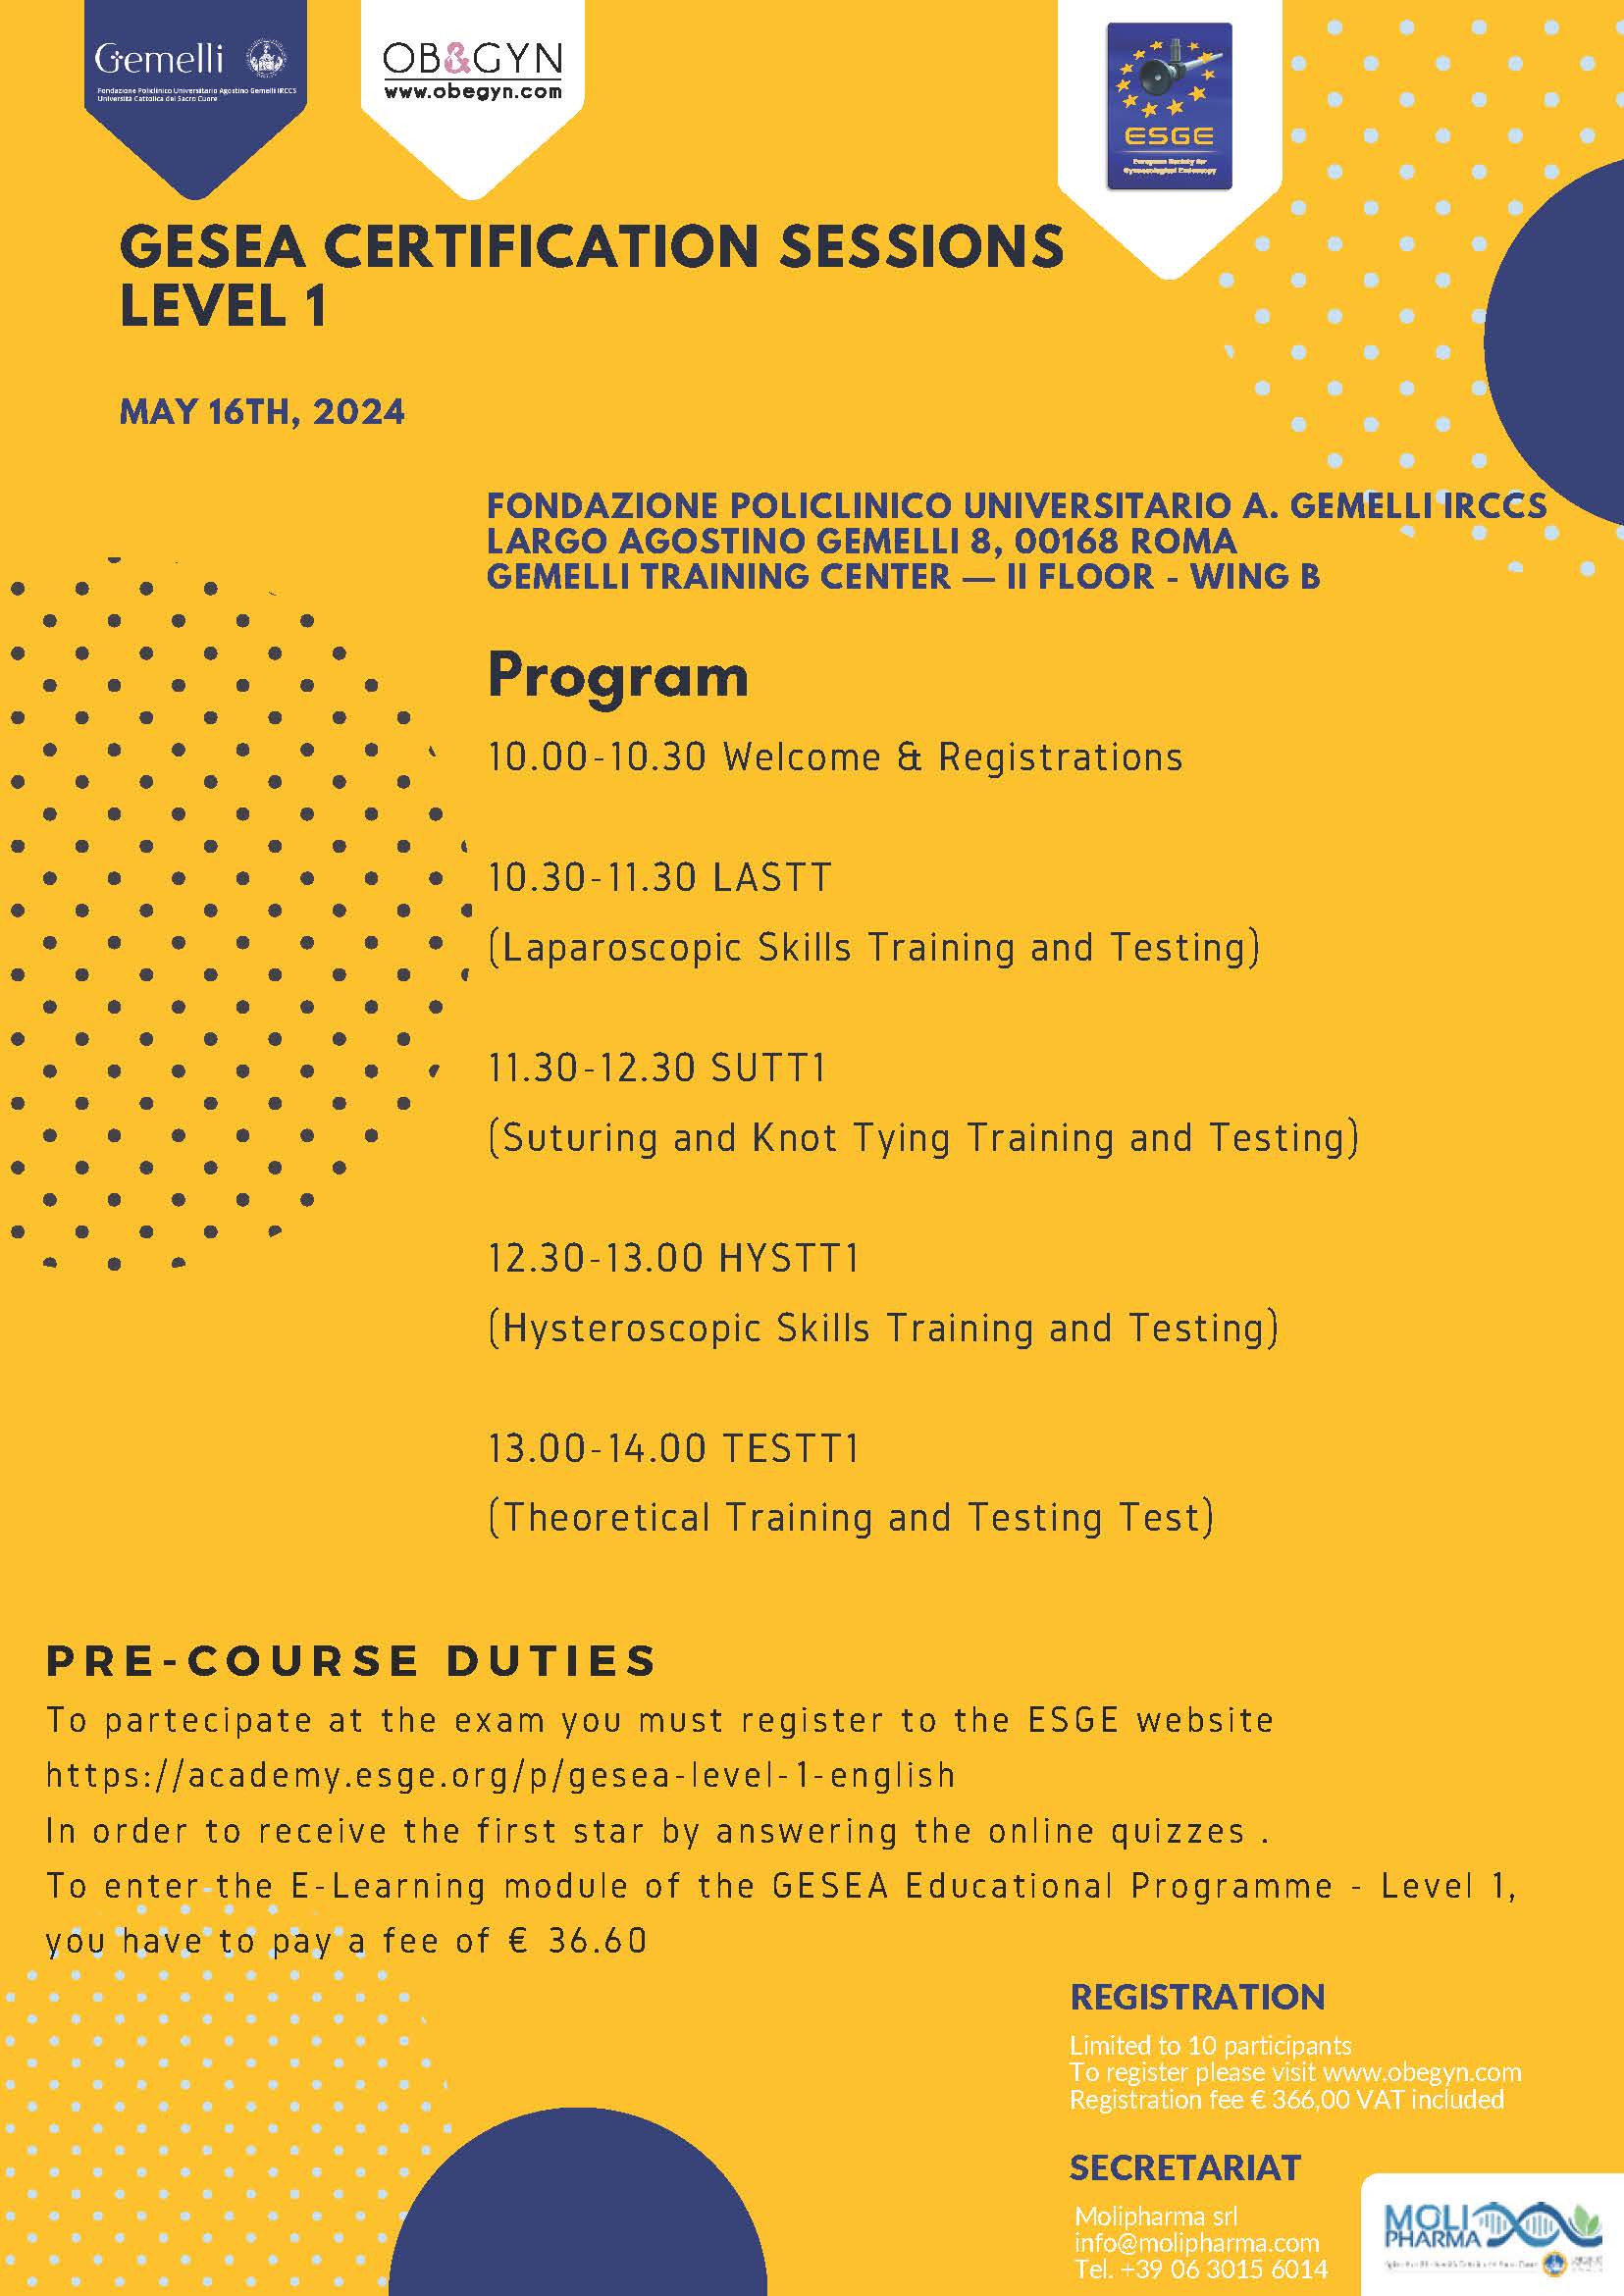 Programma GESEA CERTIFICATION SESSION — LEVEL 1 - MAY 16TH, 2024